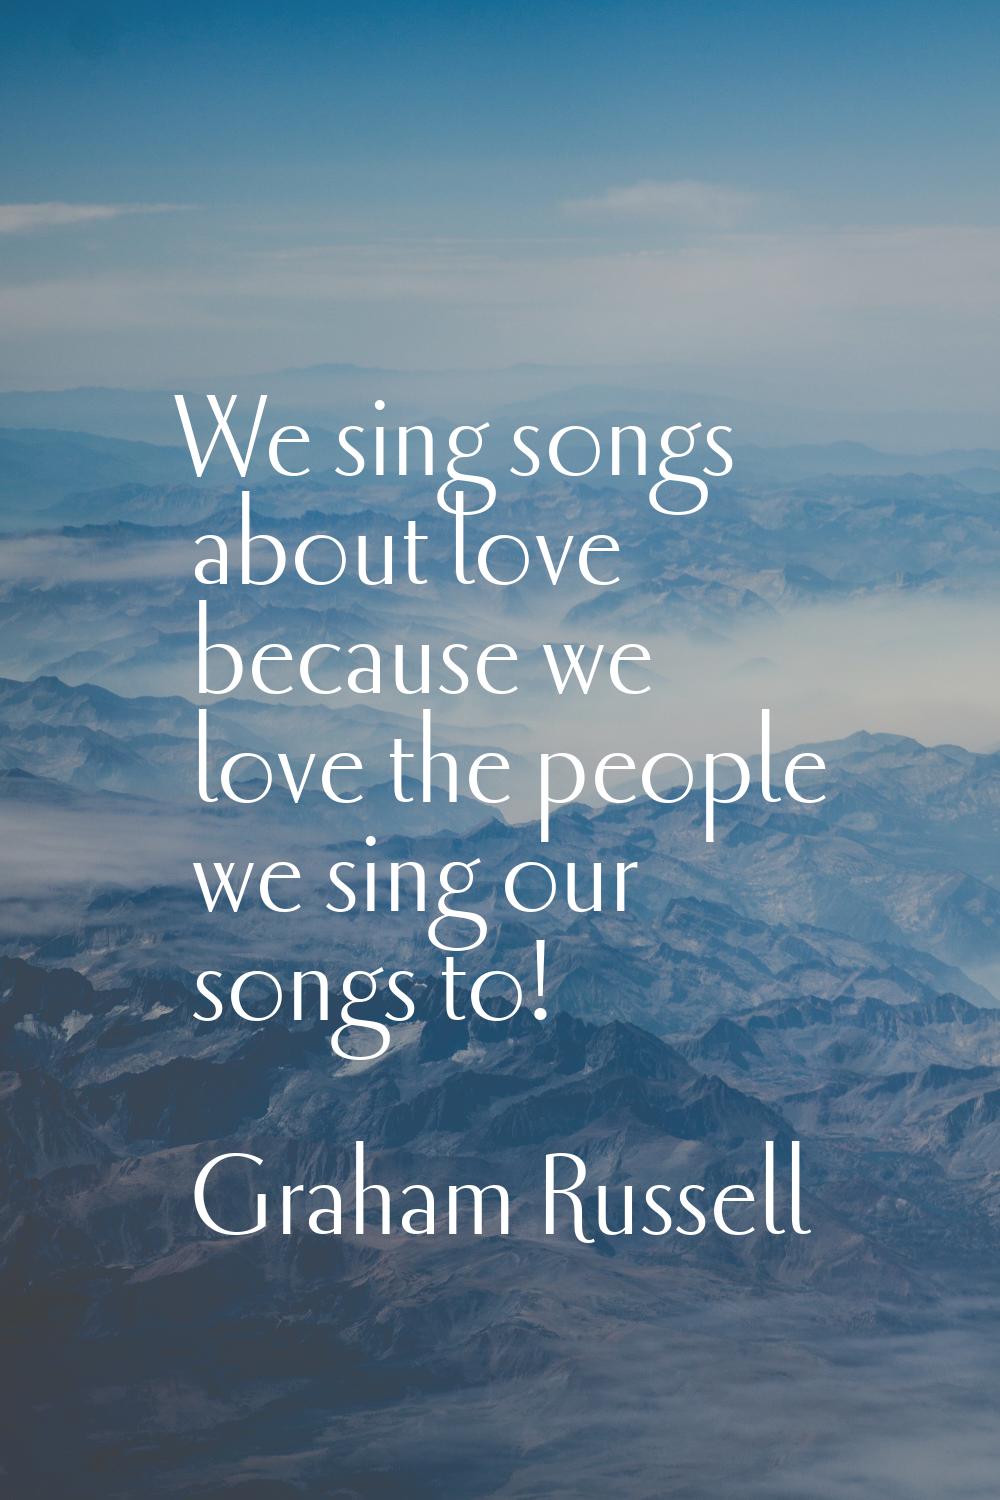 We sing songs about love because we love the people we sing our songs to!